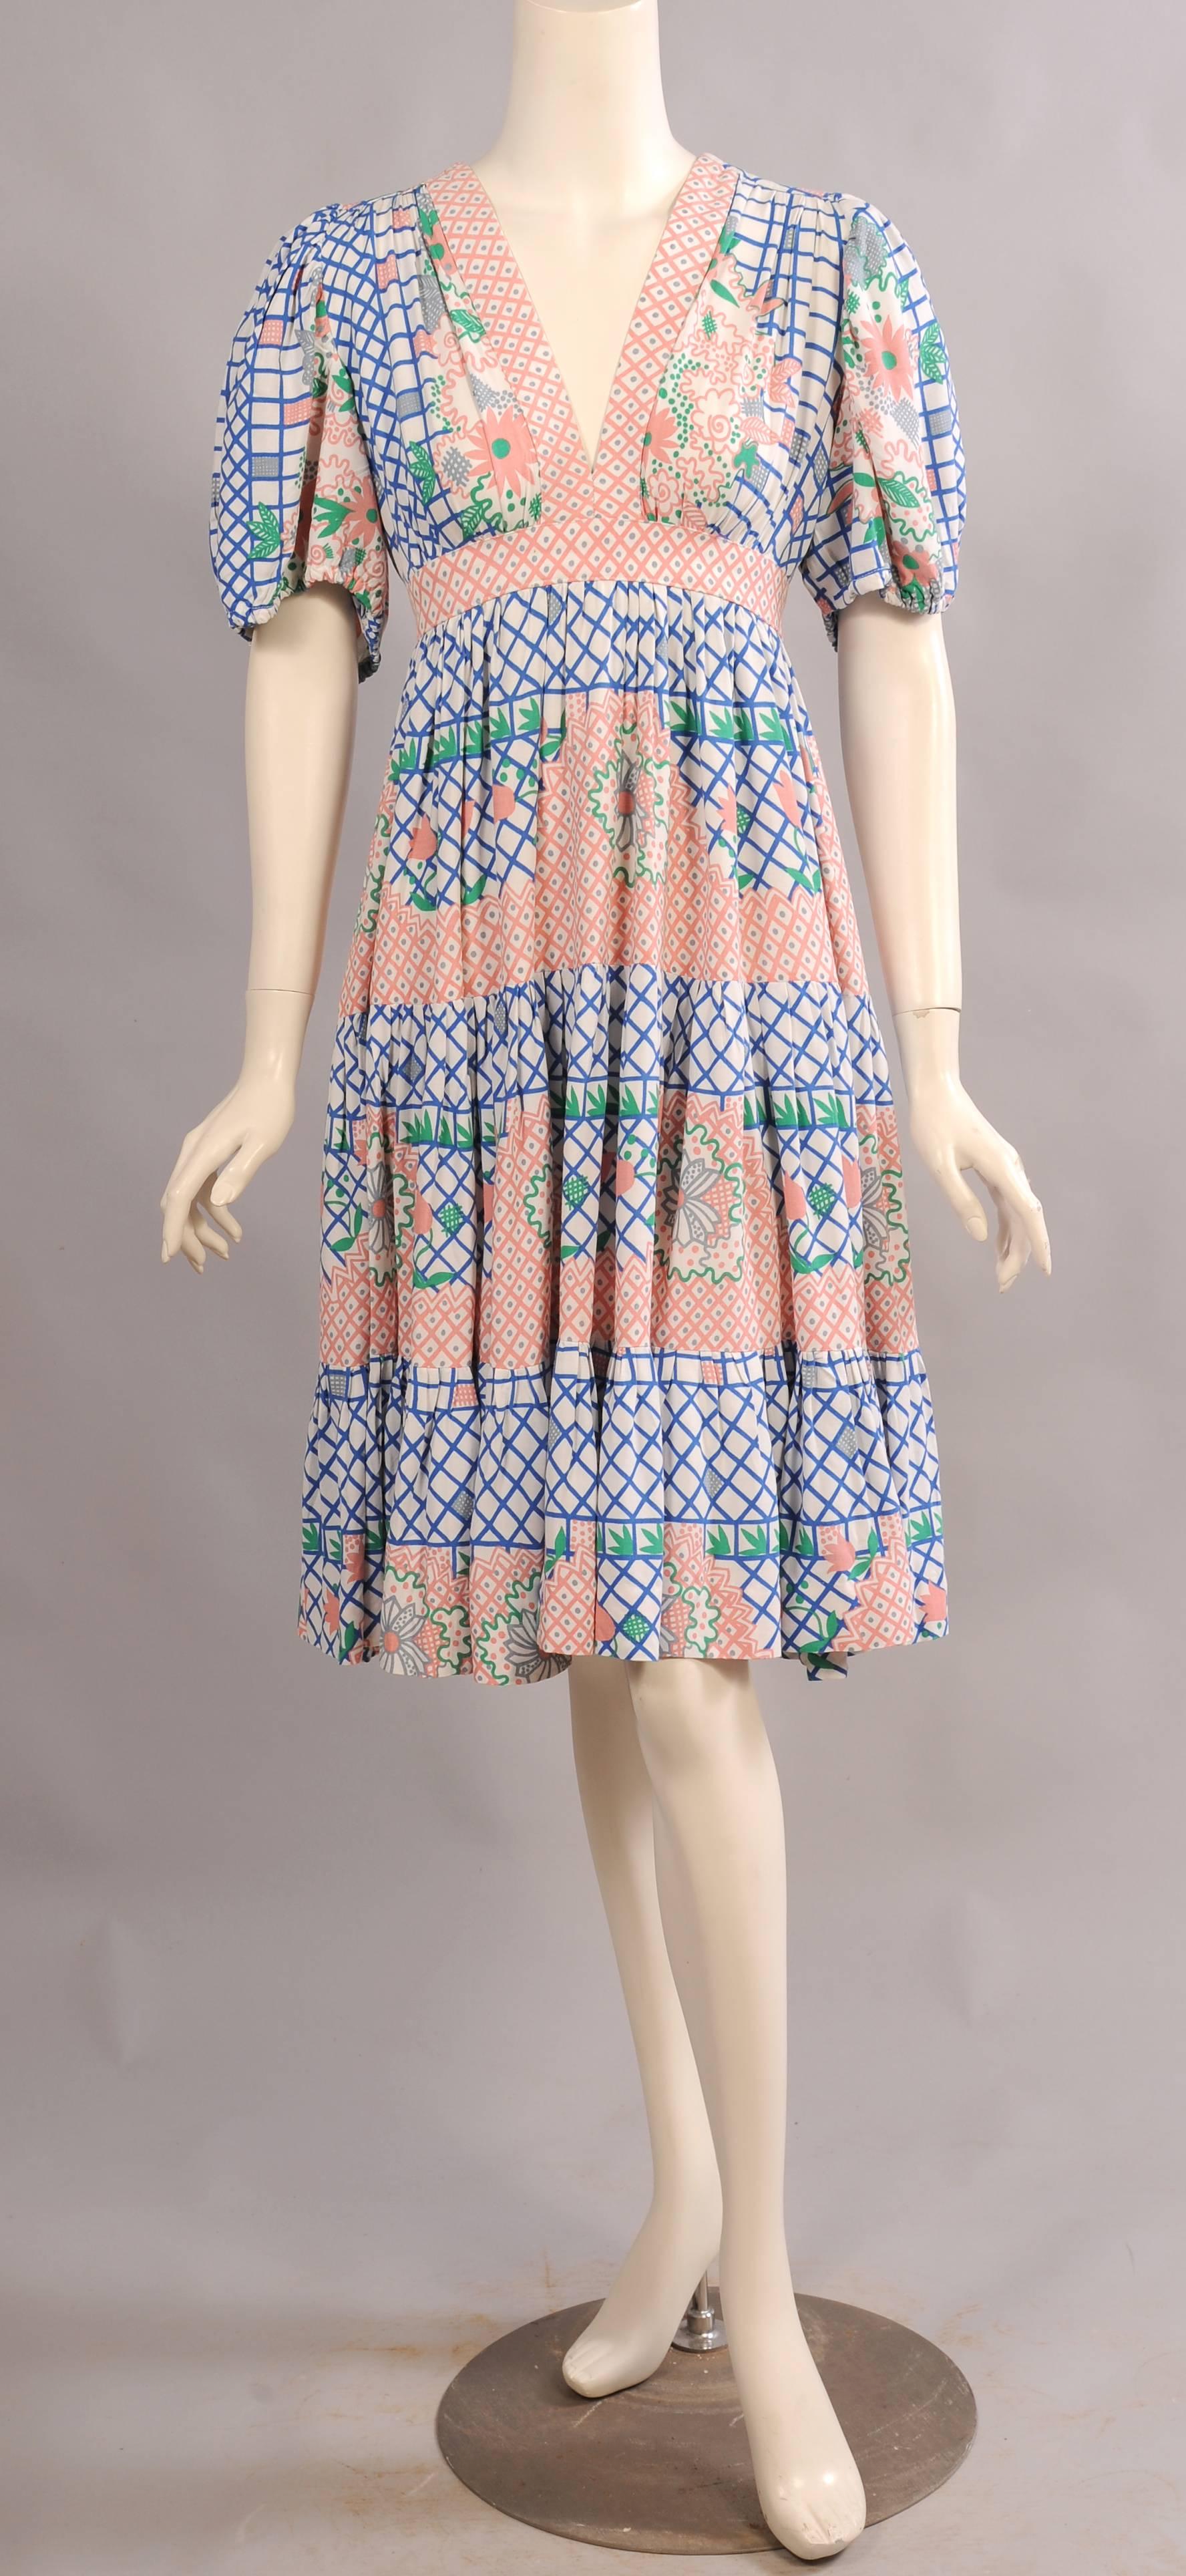 A delightful floral and geometric print designed by Celia Birtwell adds a great deal of charm to this Ossie Clark summer dress. There is a V shaped neckline above an Empire waist. The sleeves are full and gathered with elastic. The skirt has three